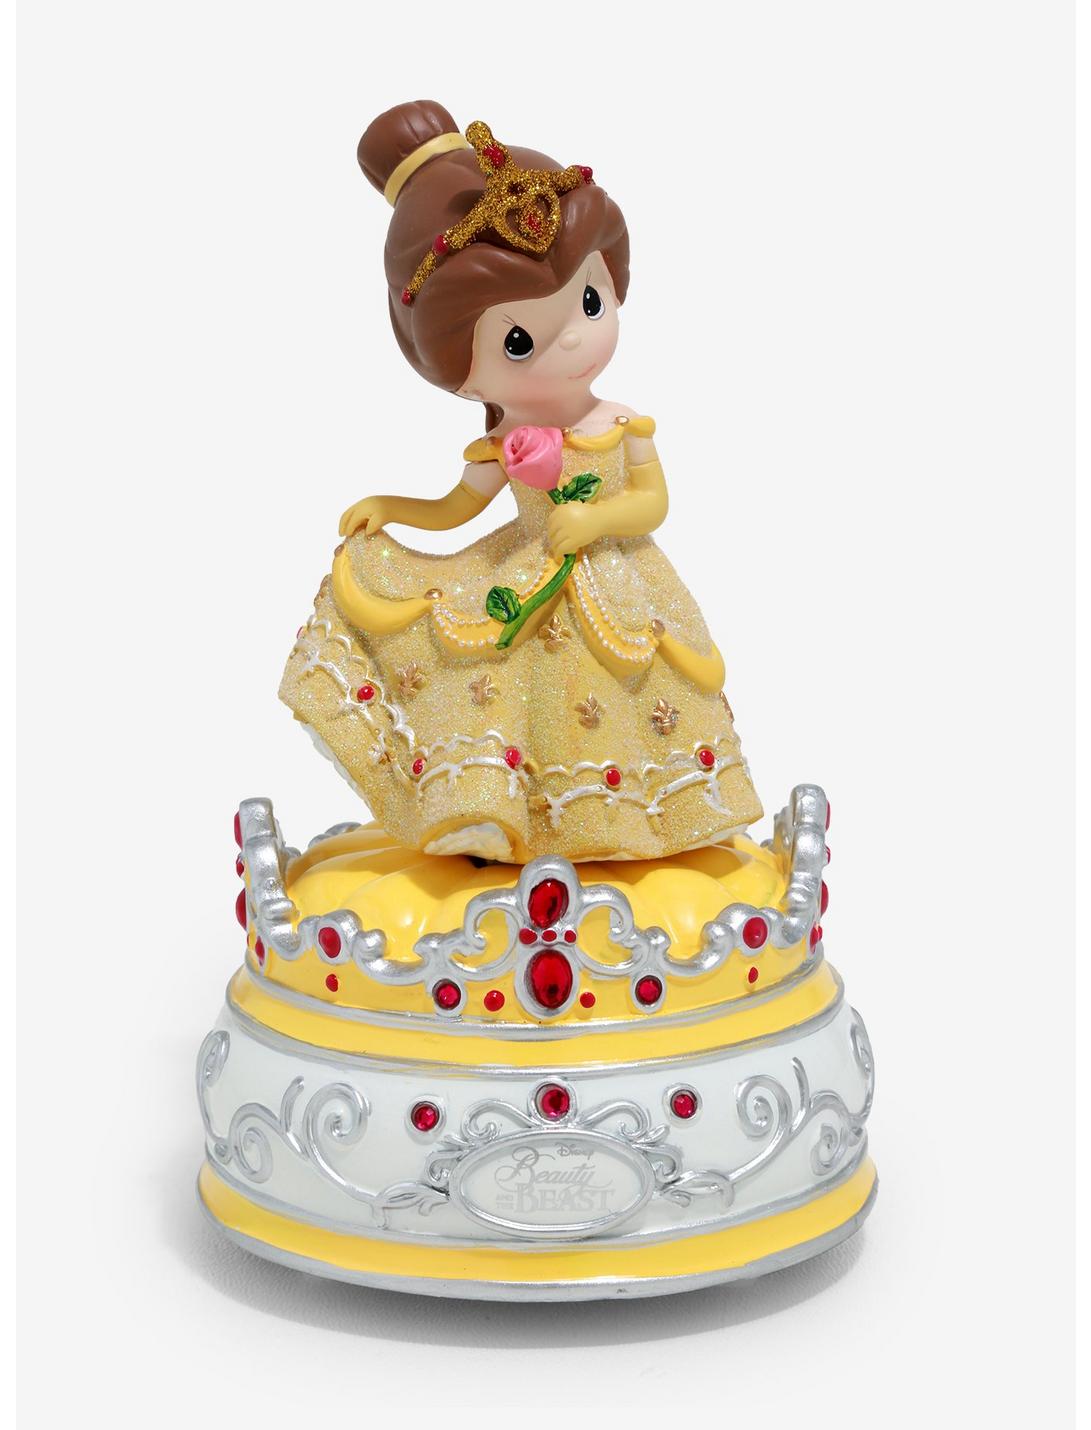 Precious Moments Disney Beauty And The Beast Belle Musical Figurine, , hi-res